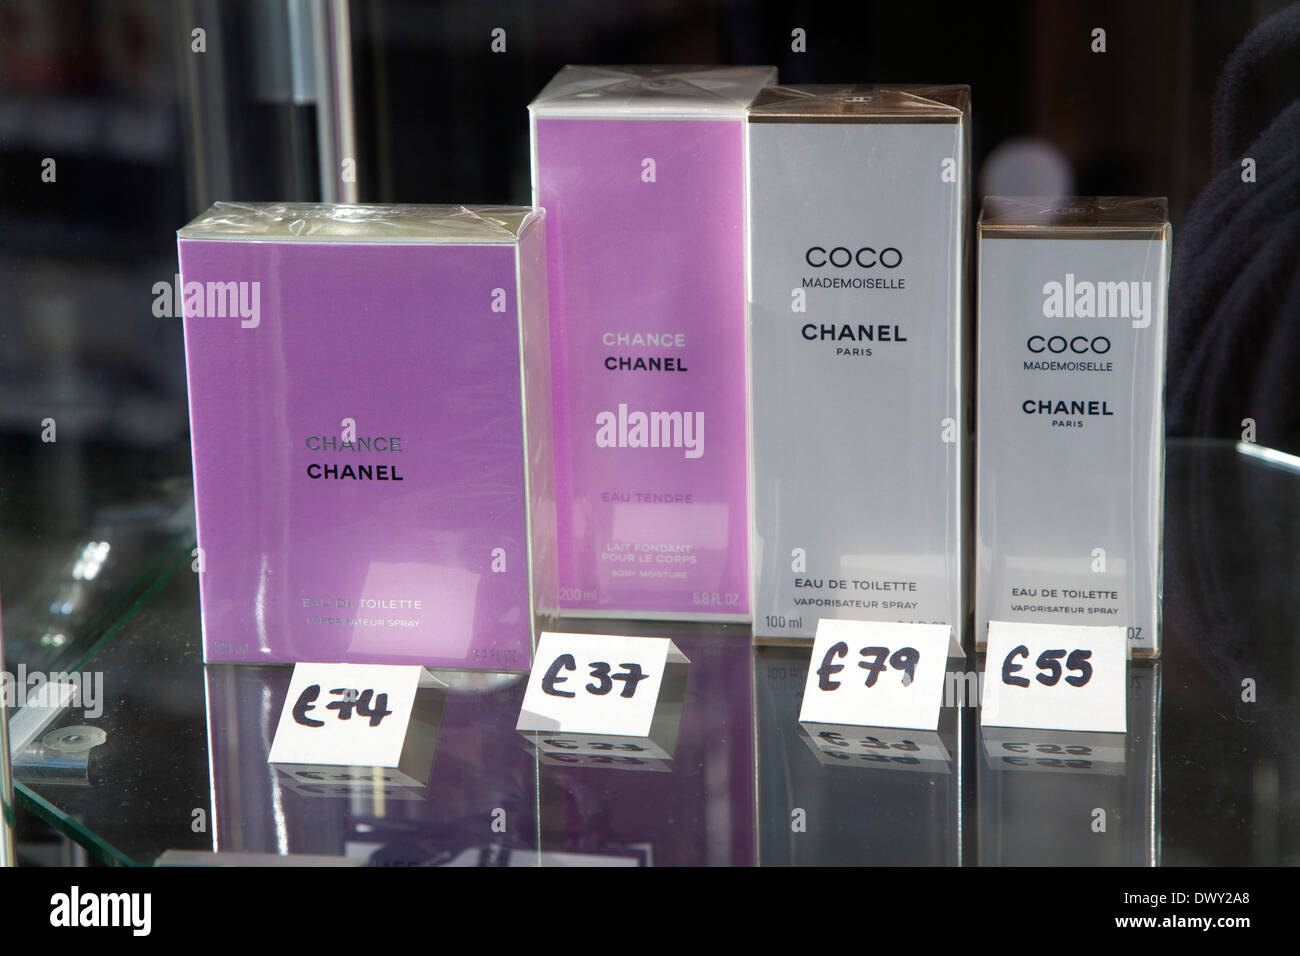 Close up of priced Chanel perfume products, UK Stock Photo